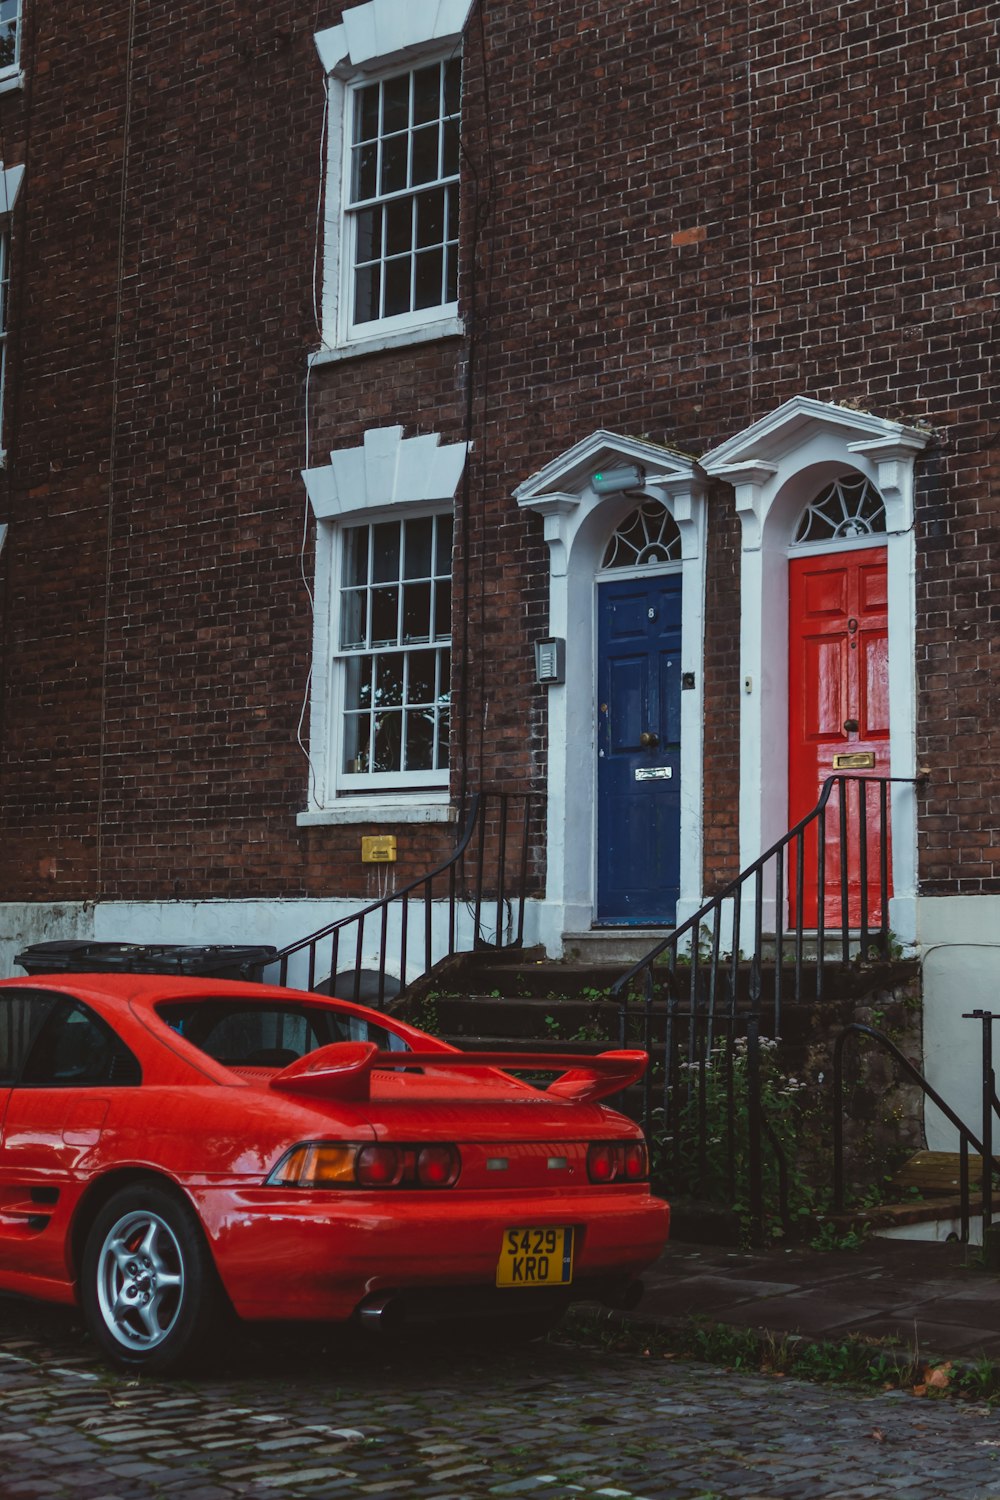 a red car parked in front of a brick building